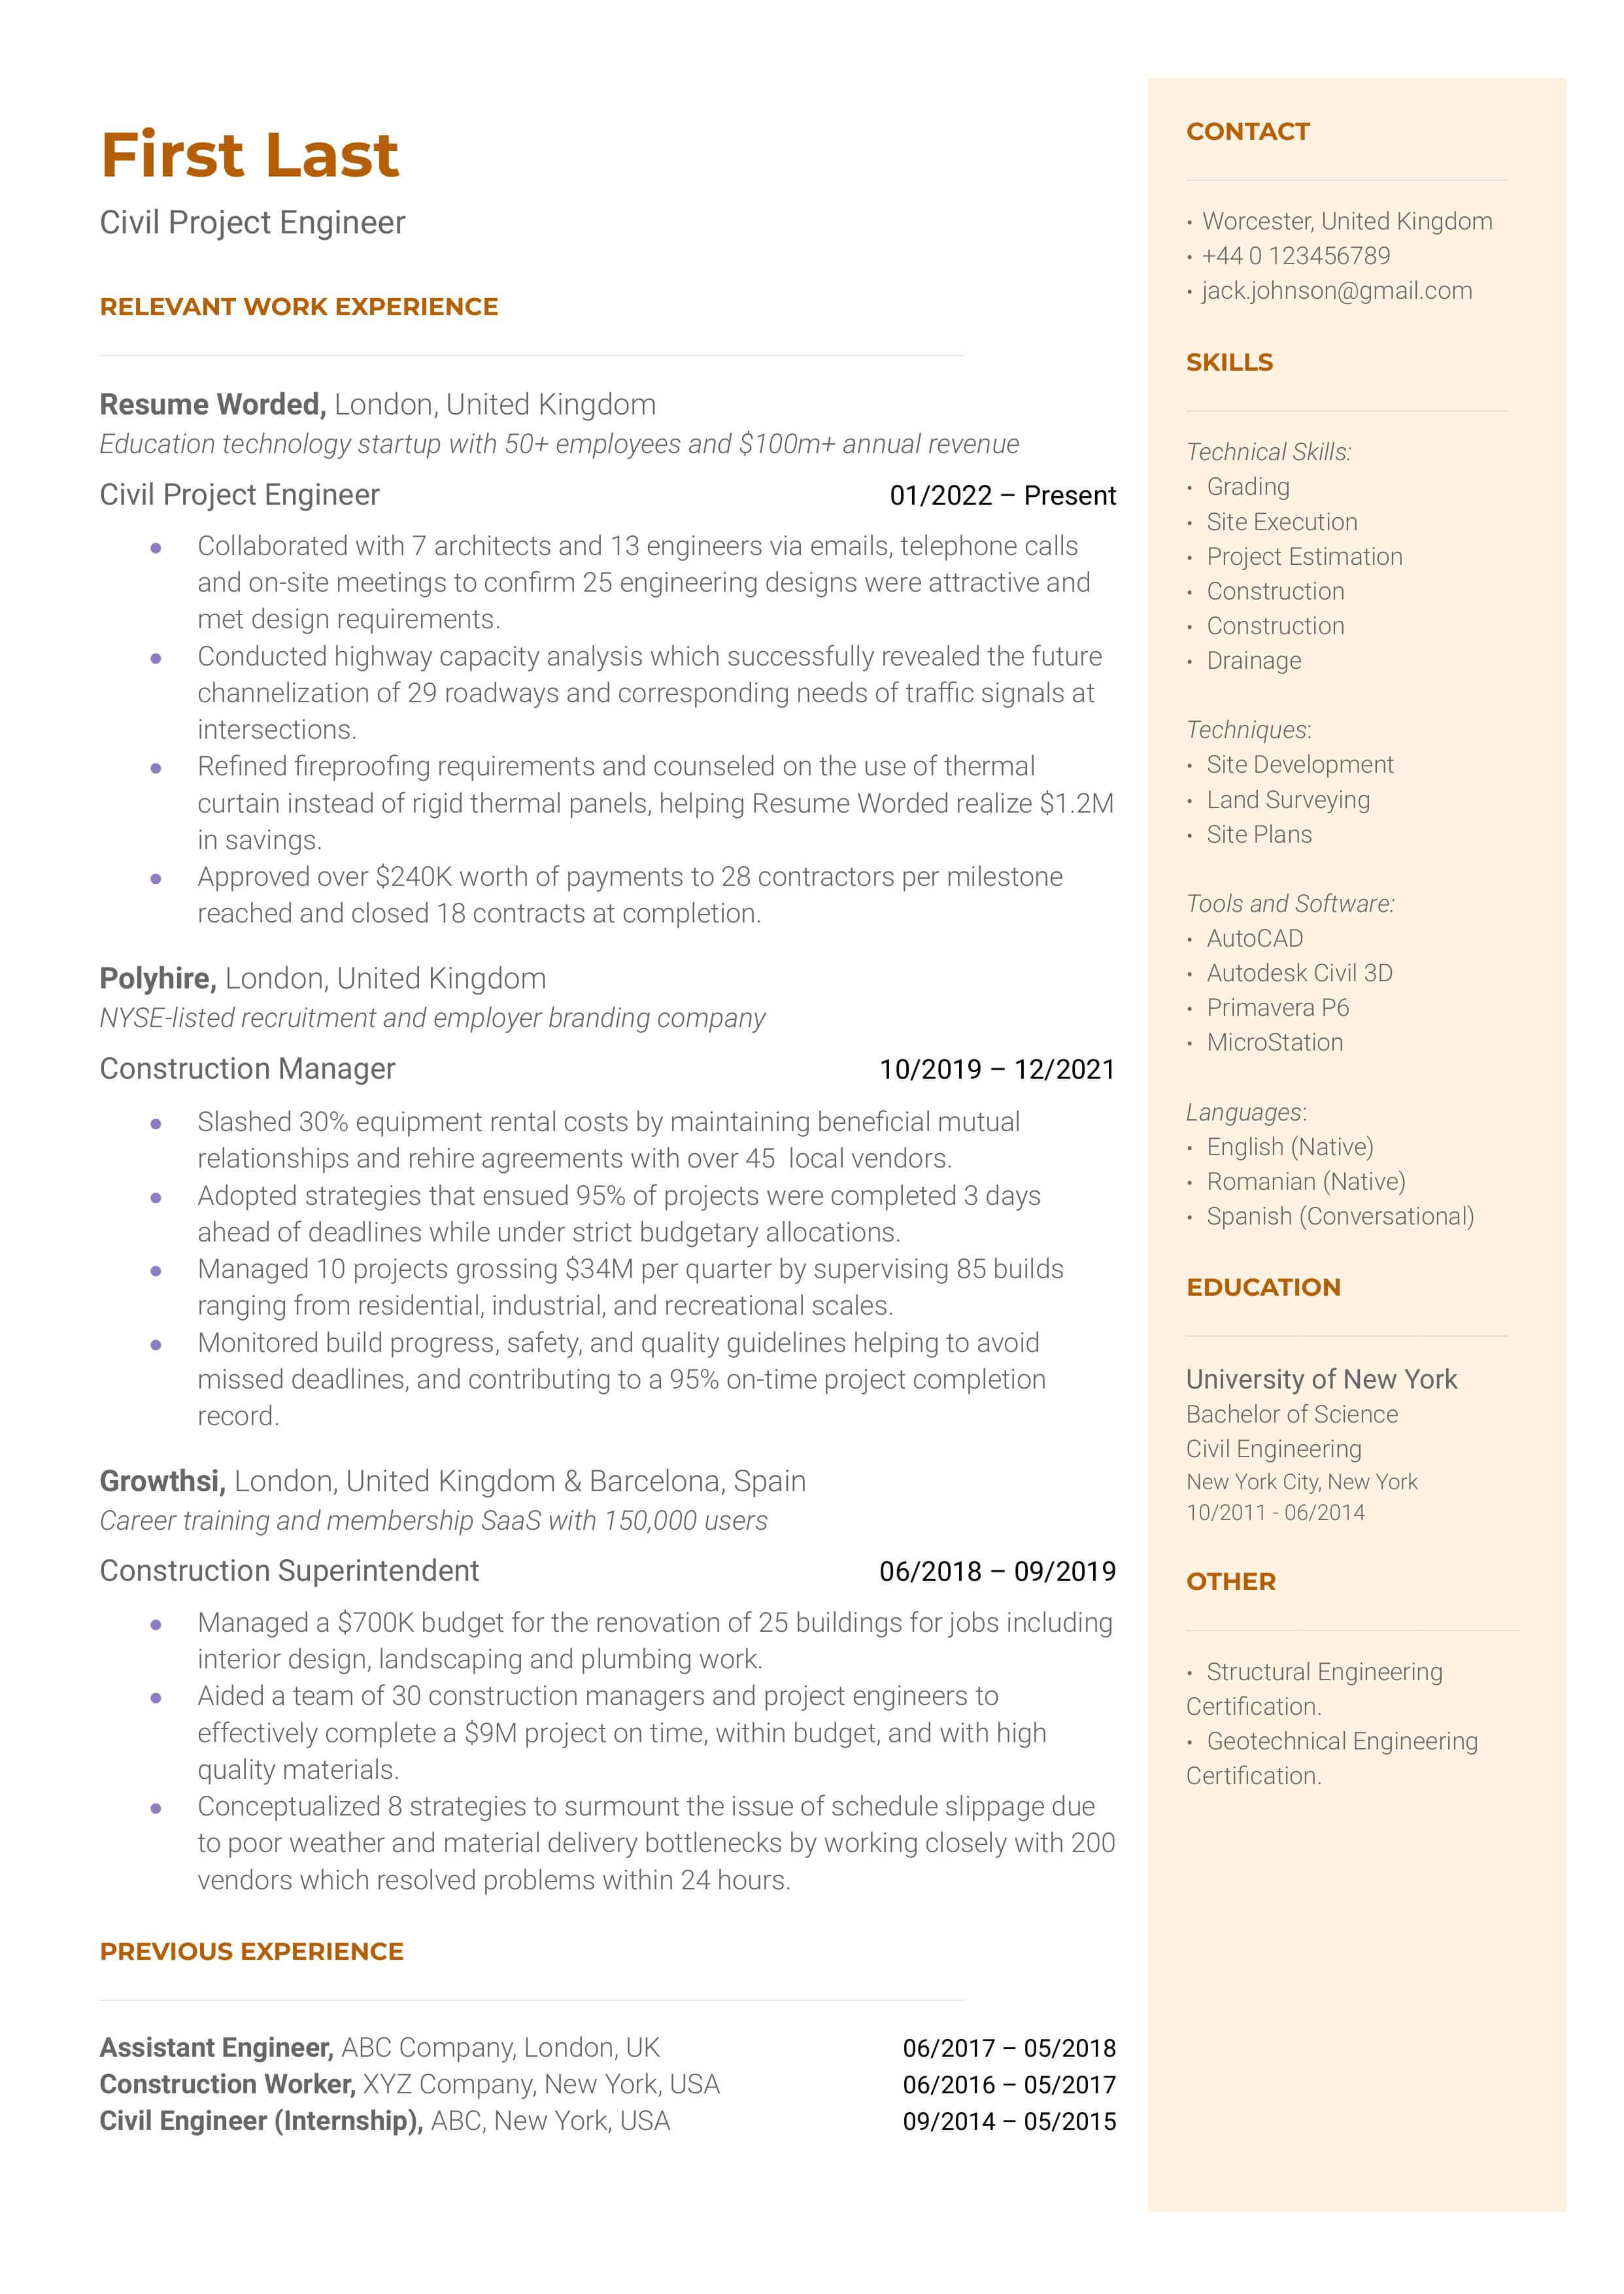 Civil Project Engineer resume template